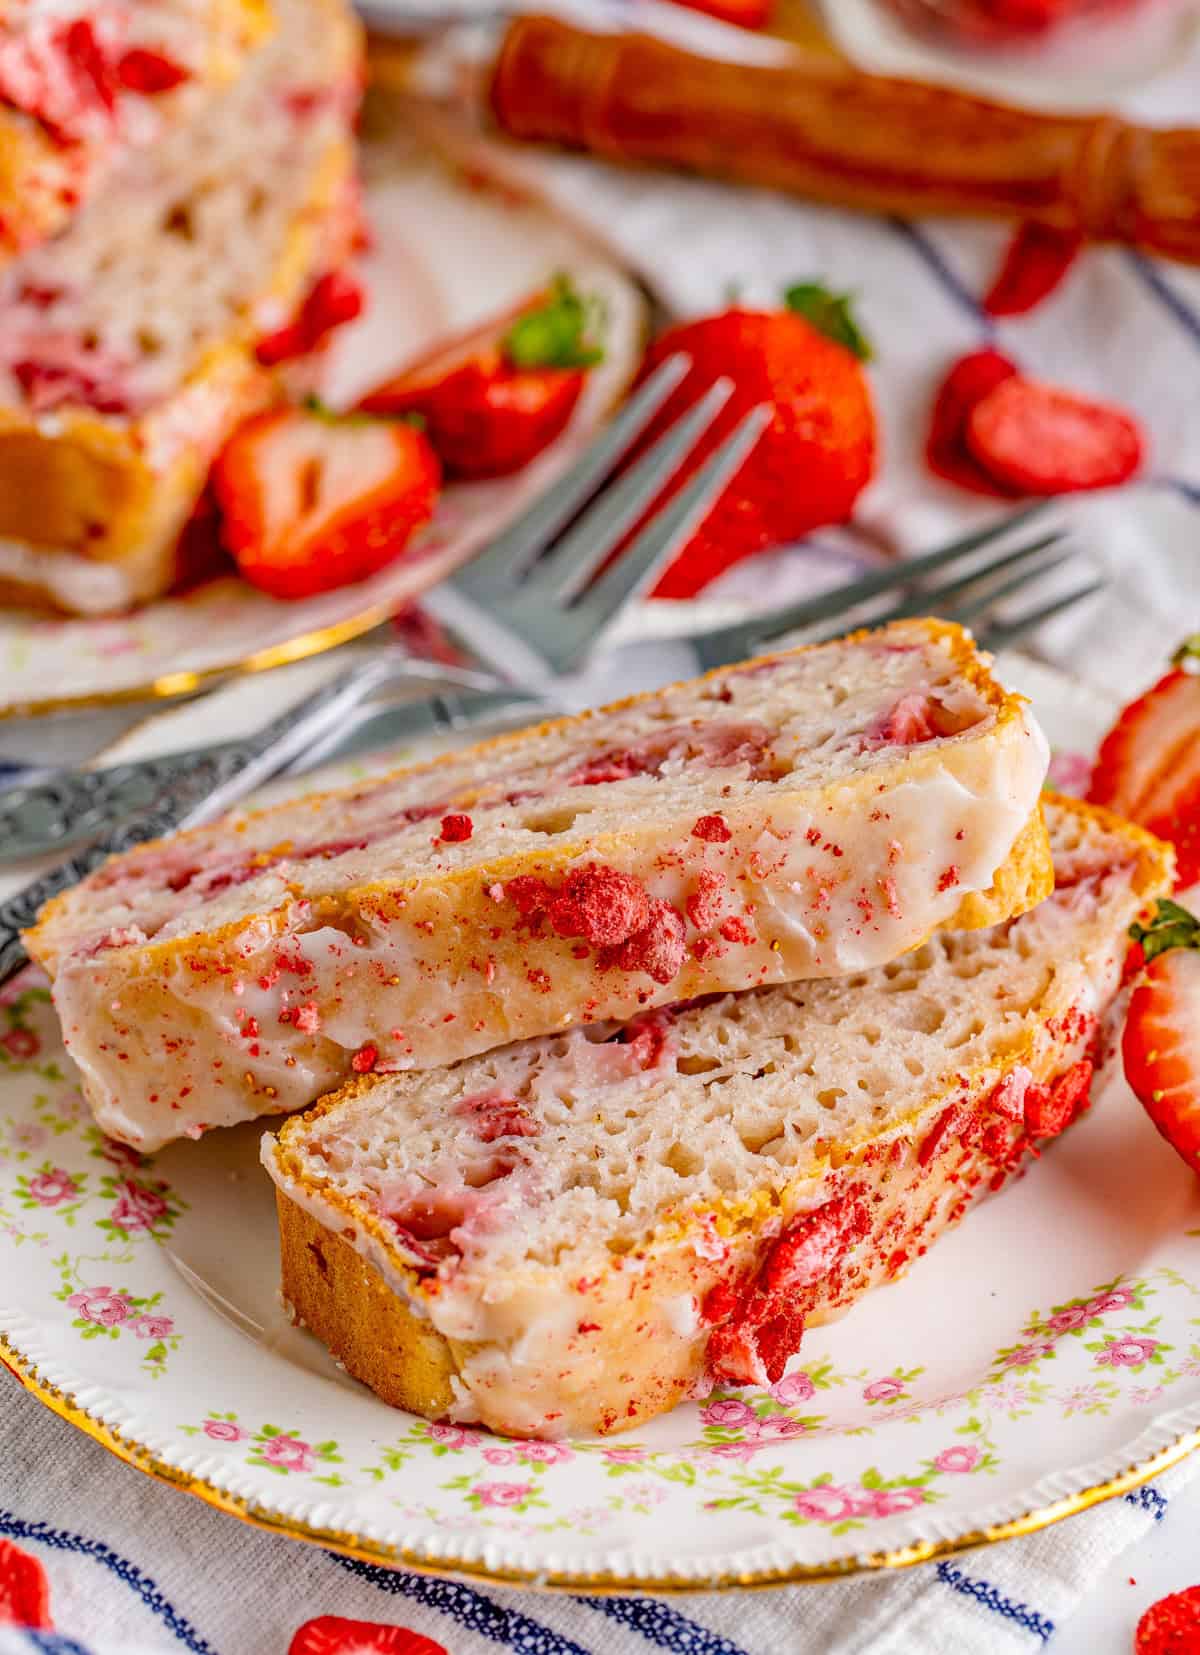 Slices of Strawberry Ice Cream Bread on decorative plate with forks and strawberries around it.